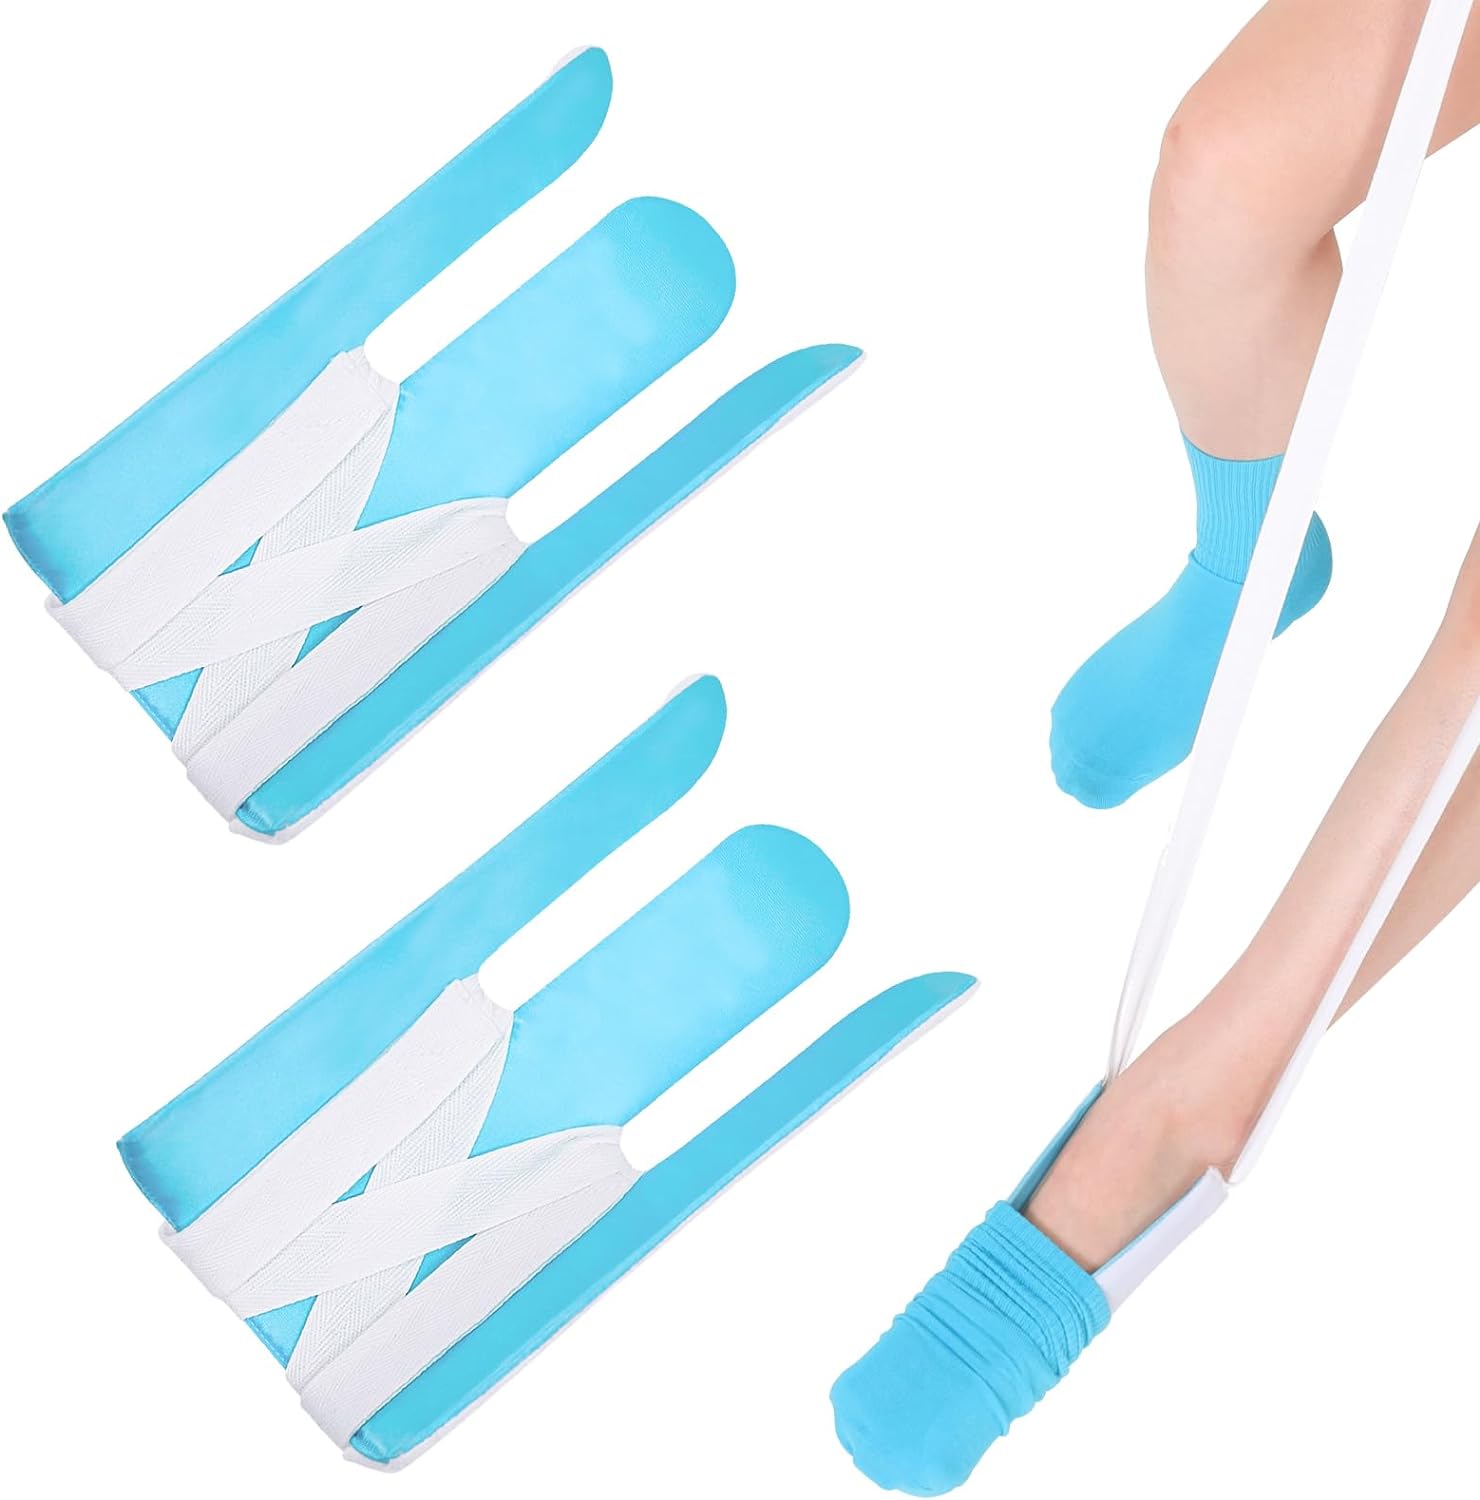 Bend-Free Sock Threader for the Elderly and Pregnant Women - Hot Sale 60% OFF🔥